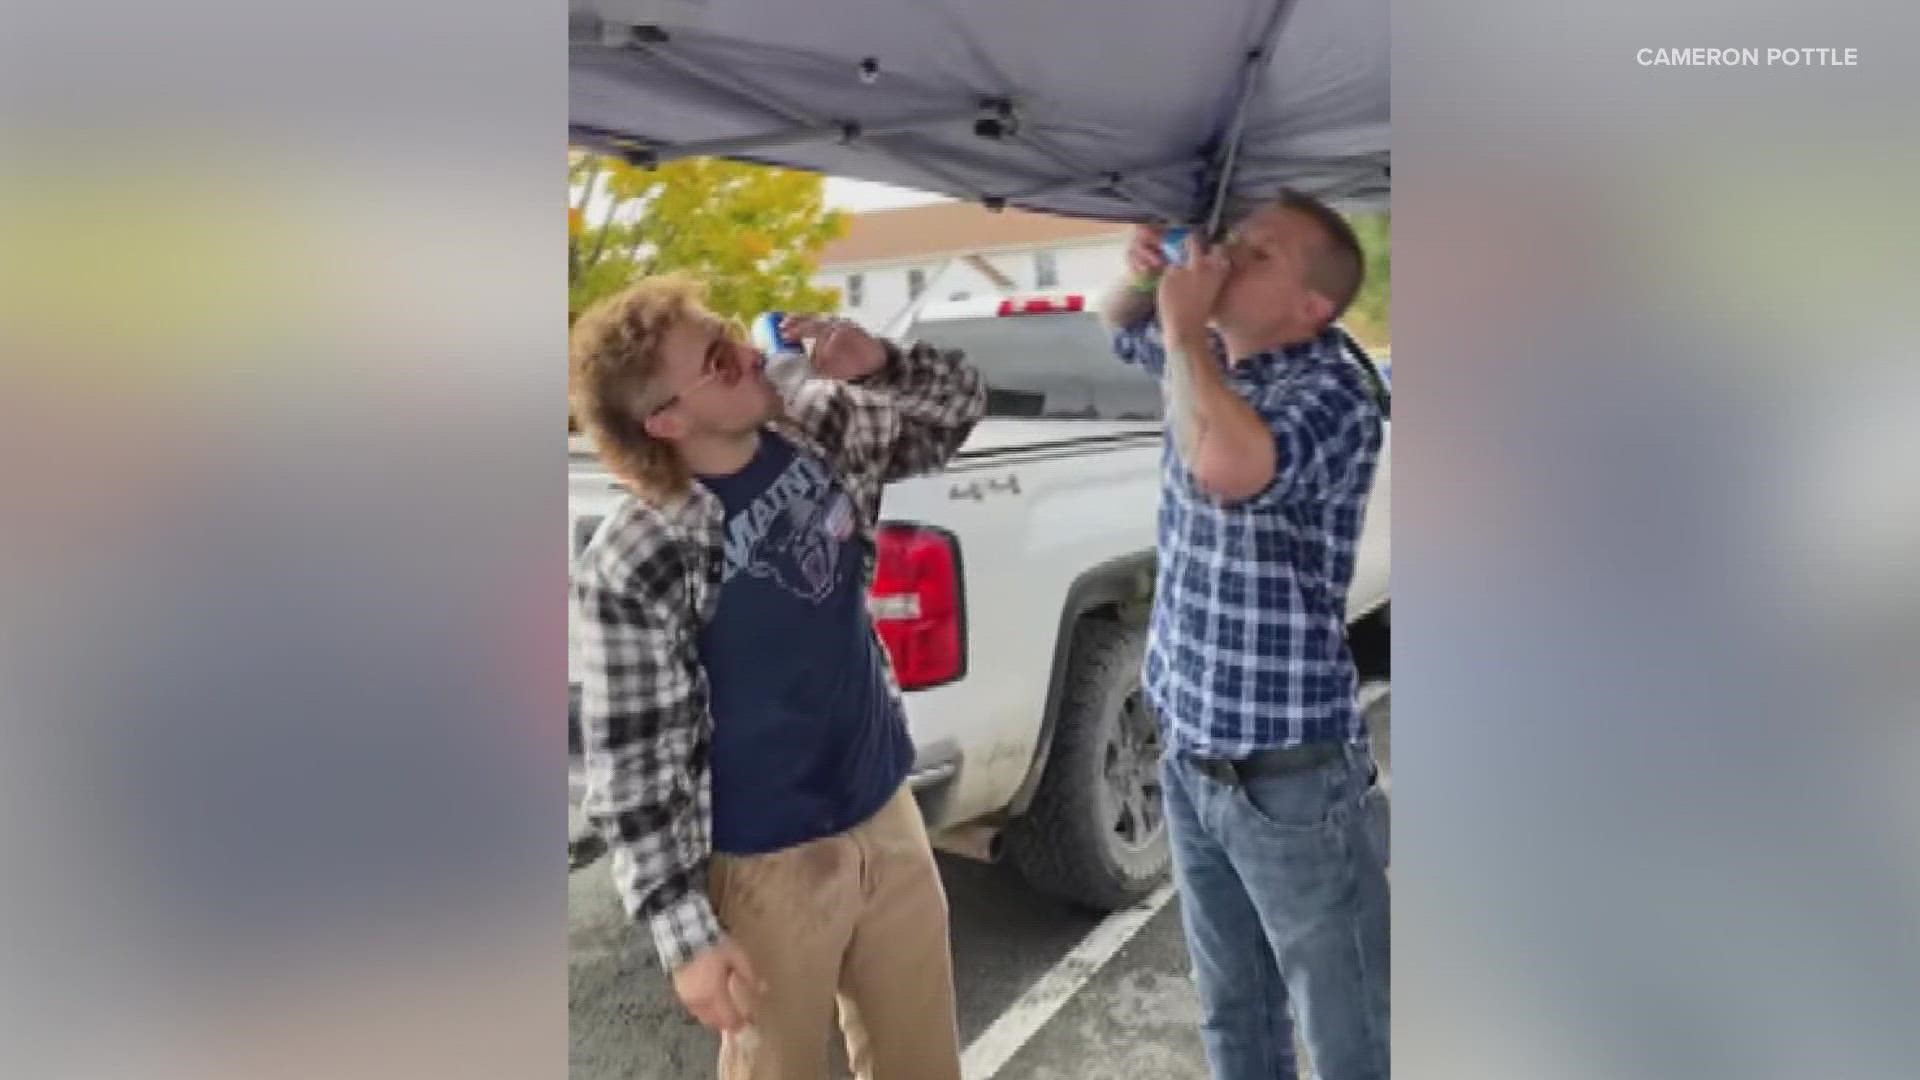 The story is likely a familiar one for some: Bud Lights and a UMaine homecoming tailgate. But the congressman, the mullet man, and the lobster twist make it unique.